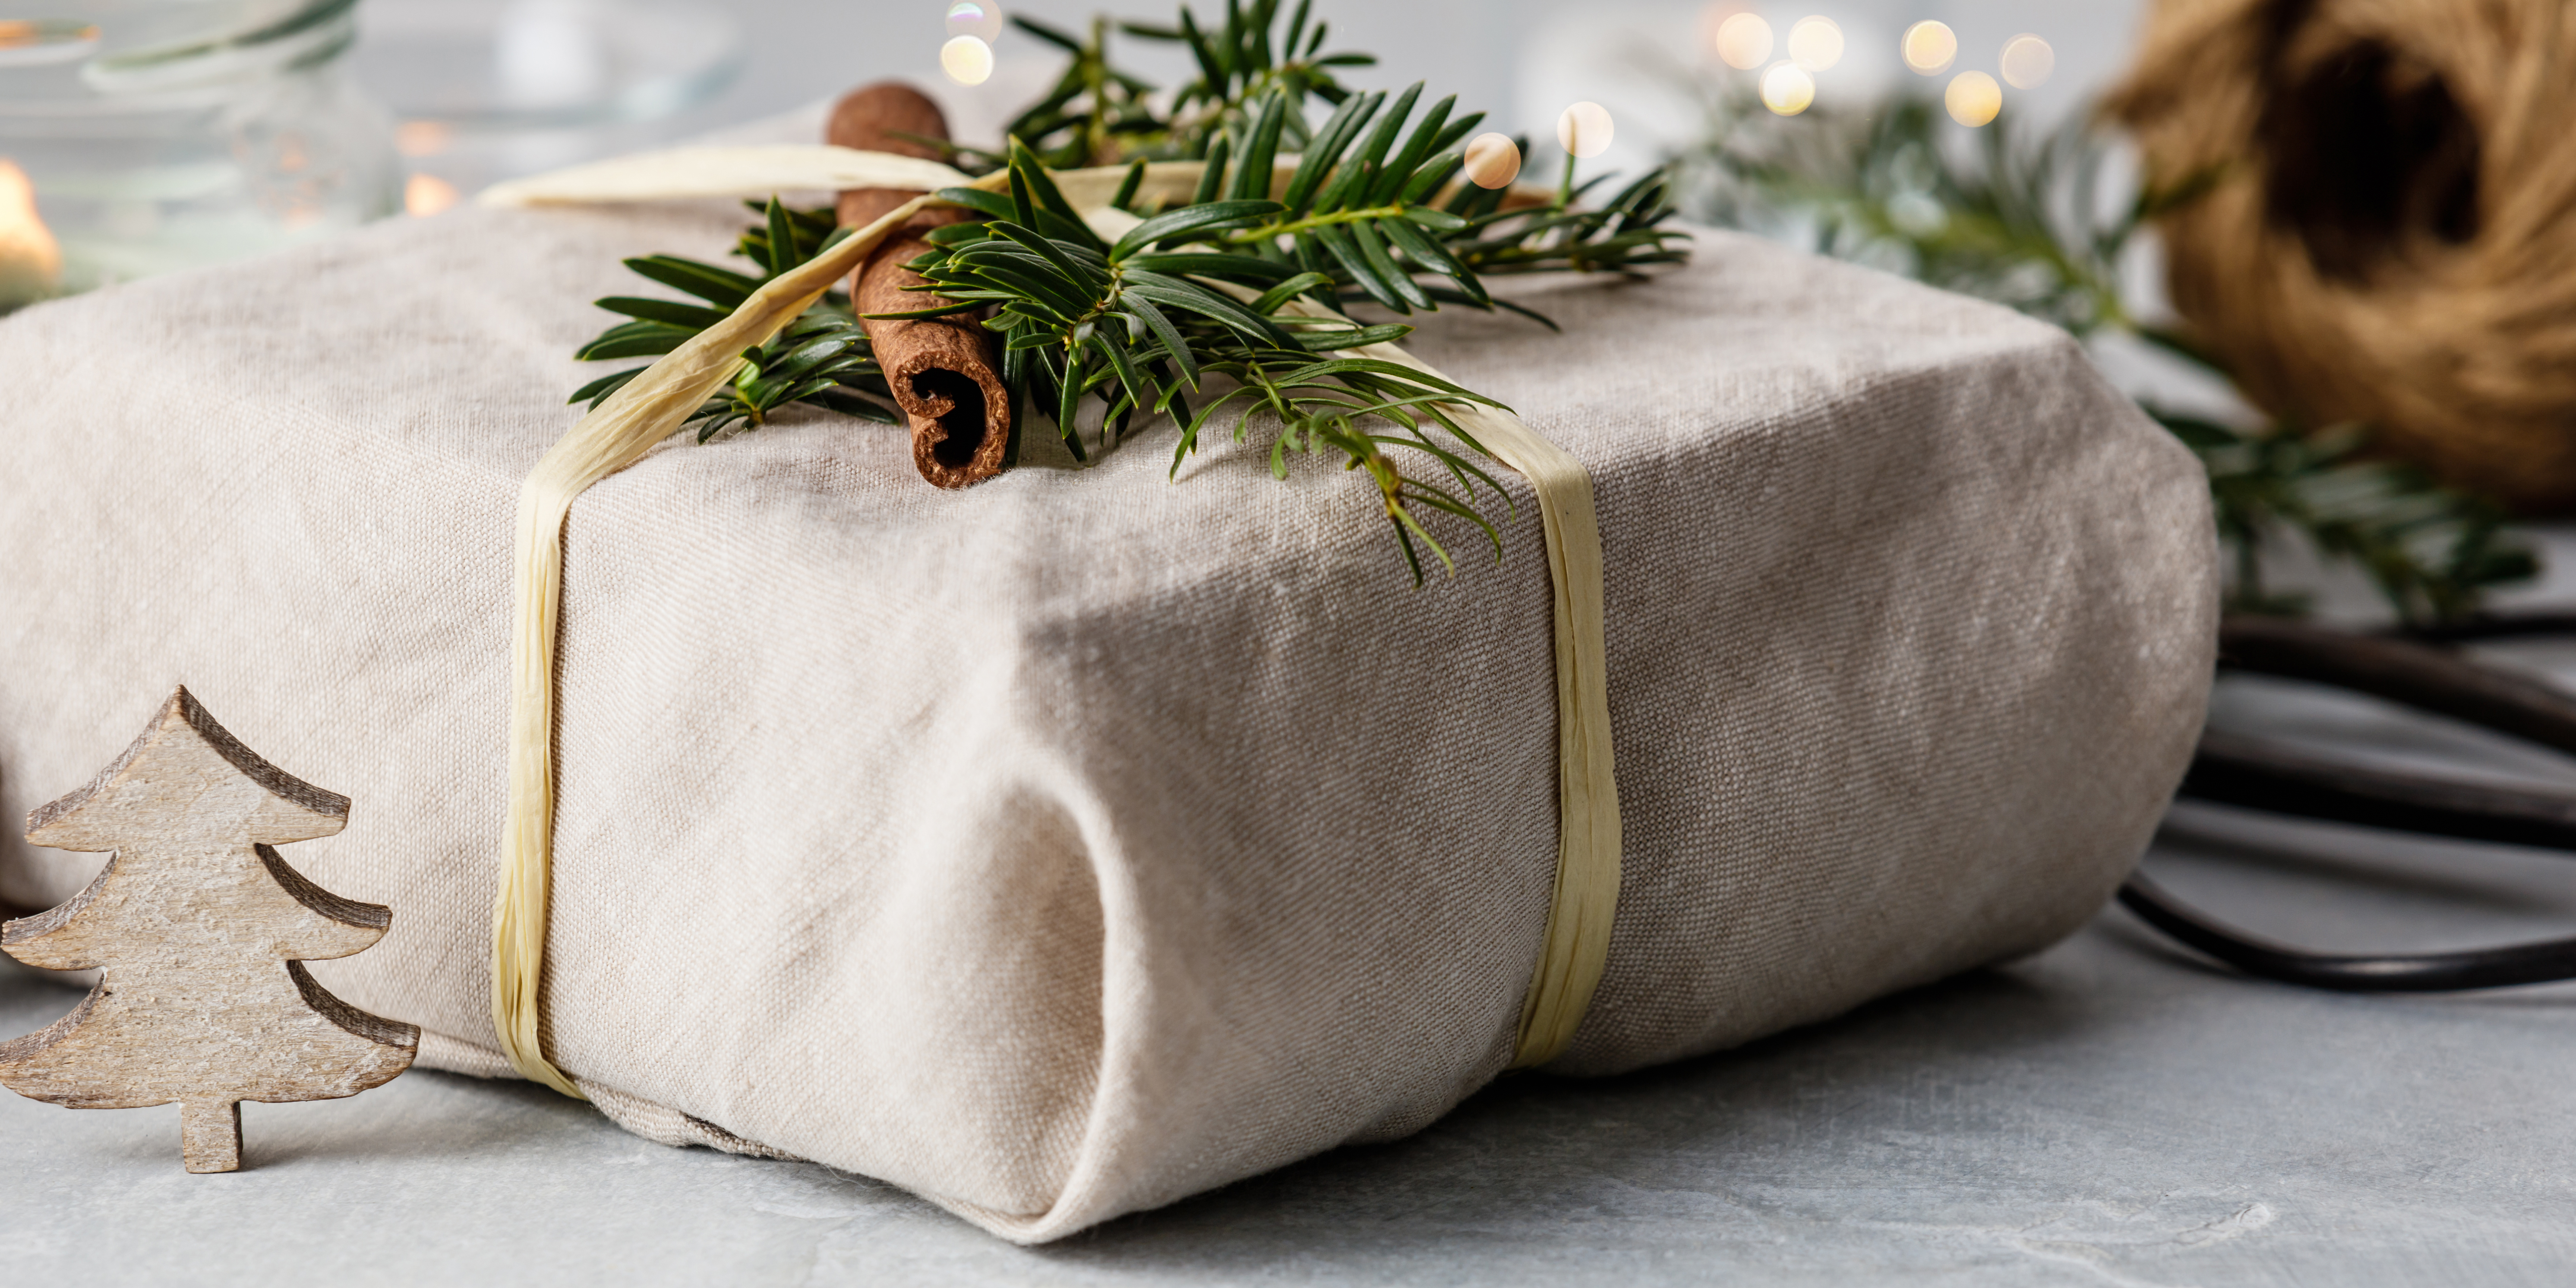 gift wrap sustainably this christmas